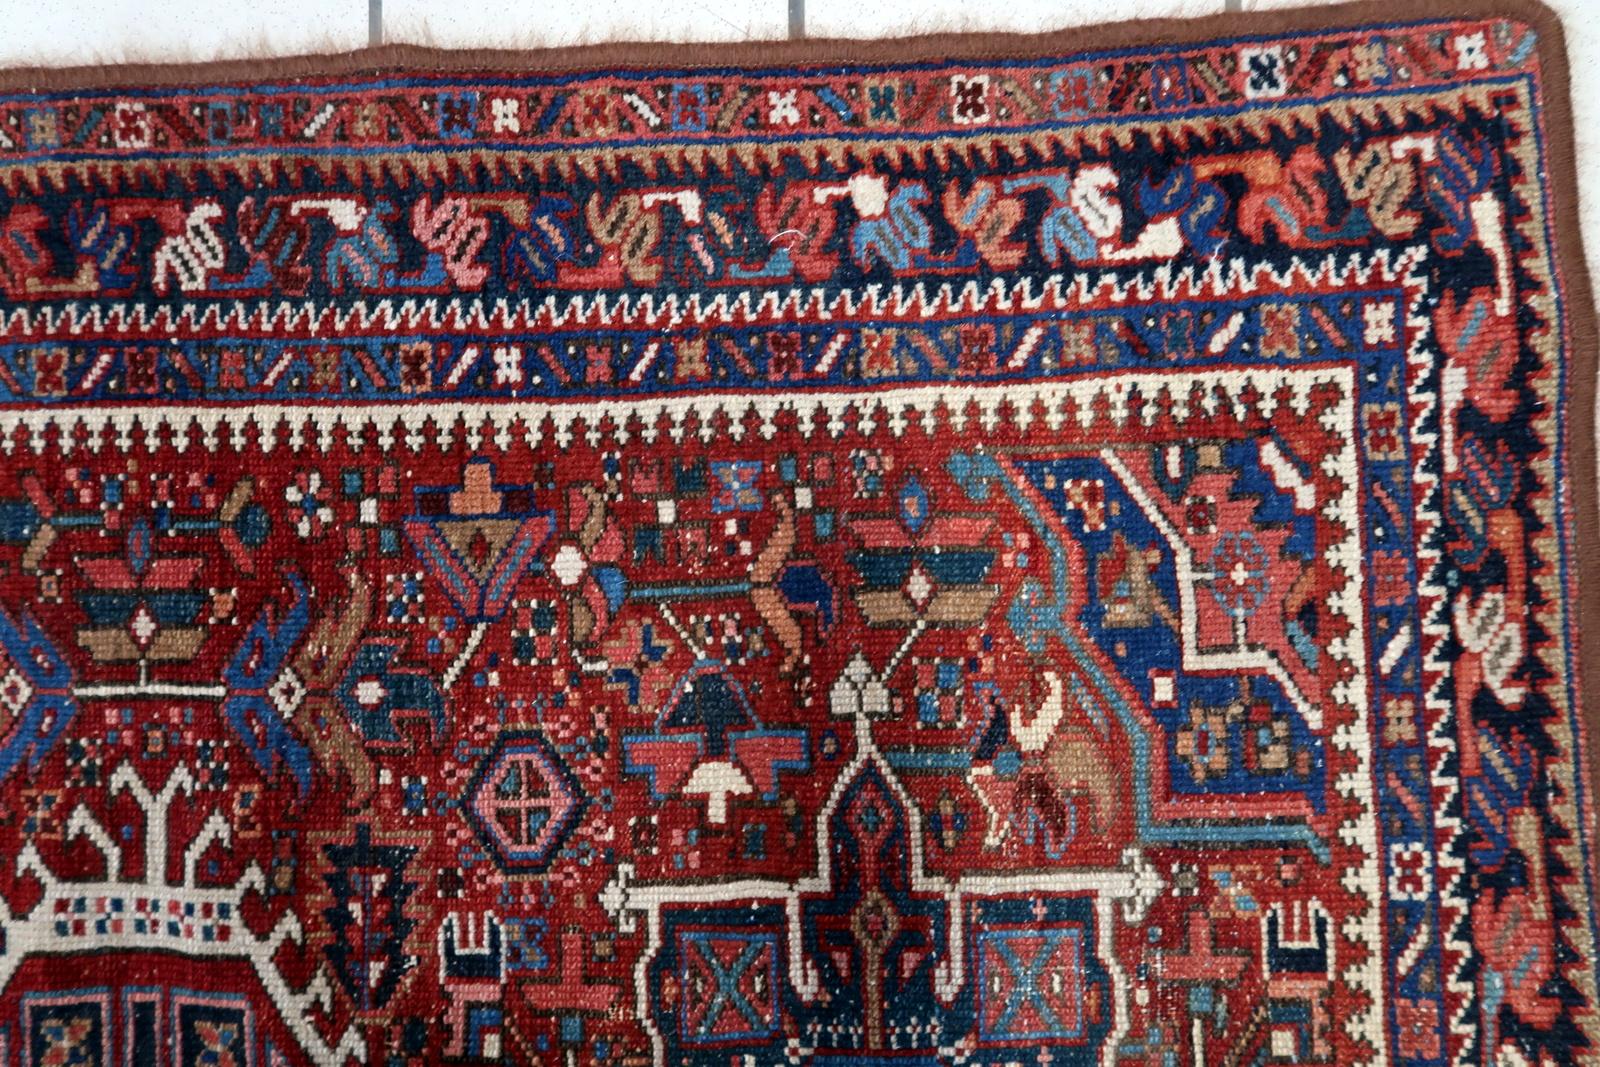 Handmade Antique Persian Style Hamadan Rug 3.4' x 4.2', 1930s - 1C1123 In Good Condition For Sale In Bordeaux, FR